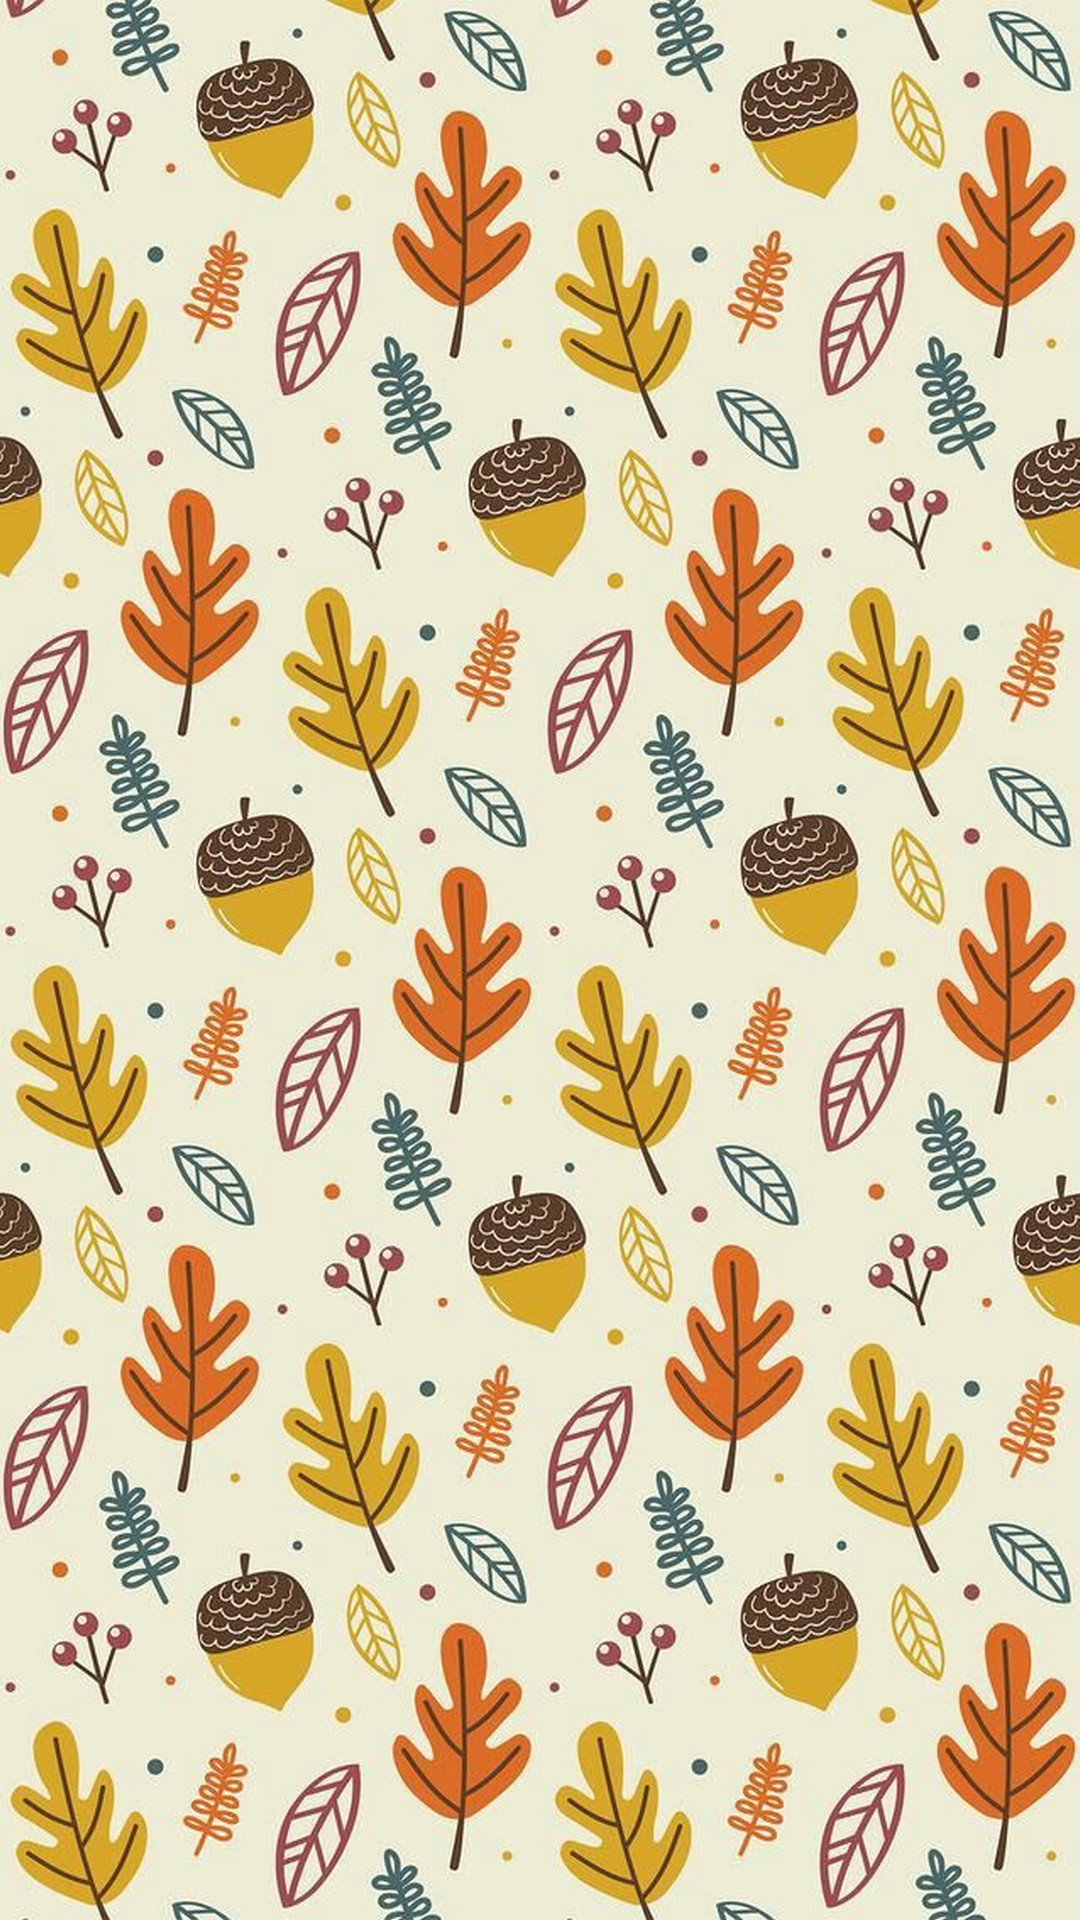 Cute Fall iPhone Wallpaper Lock Screen with high-resolution 1080x1920 pixel. You can set as wallpaper for Apple iPhone X, XS Max, XR, 8, 7, 6, SE, iPad. Enjoy and share your favorite HD wallpapers and background images